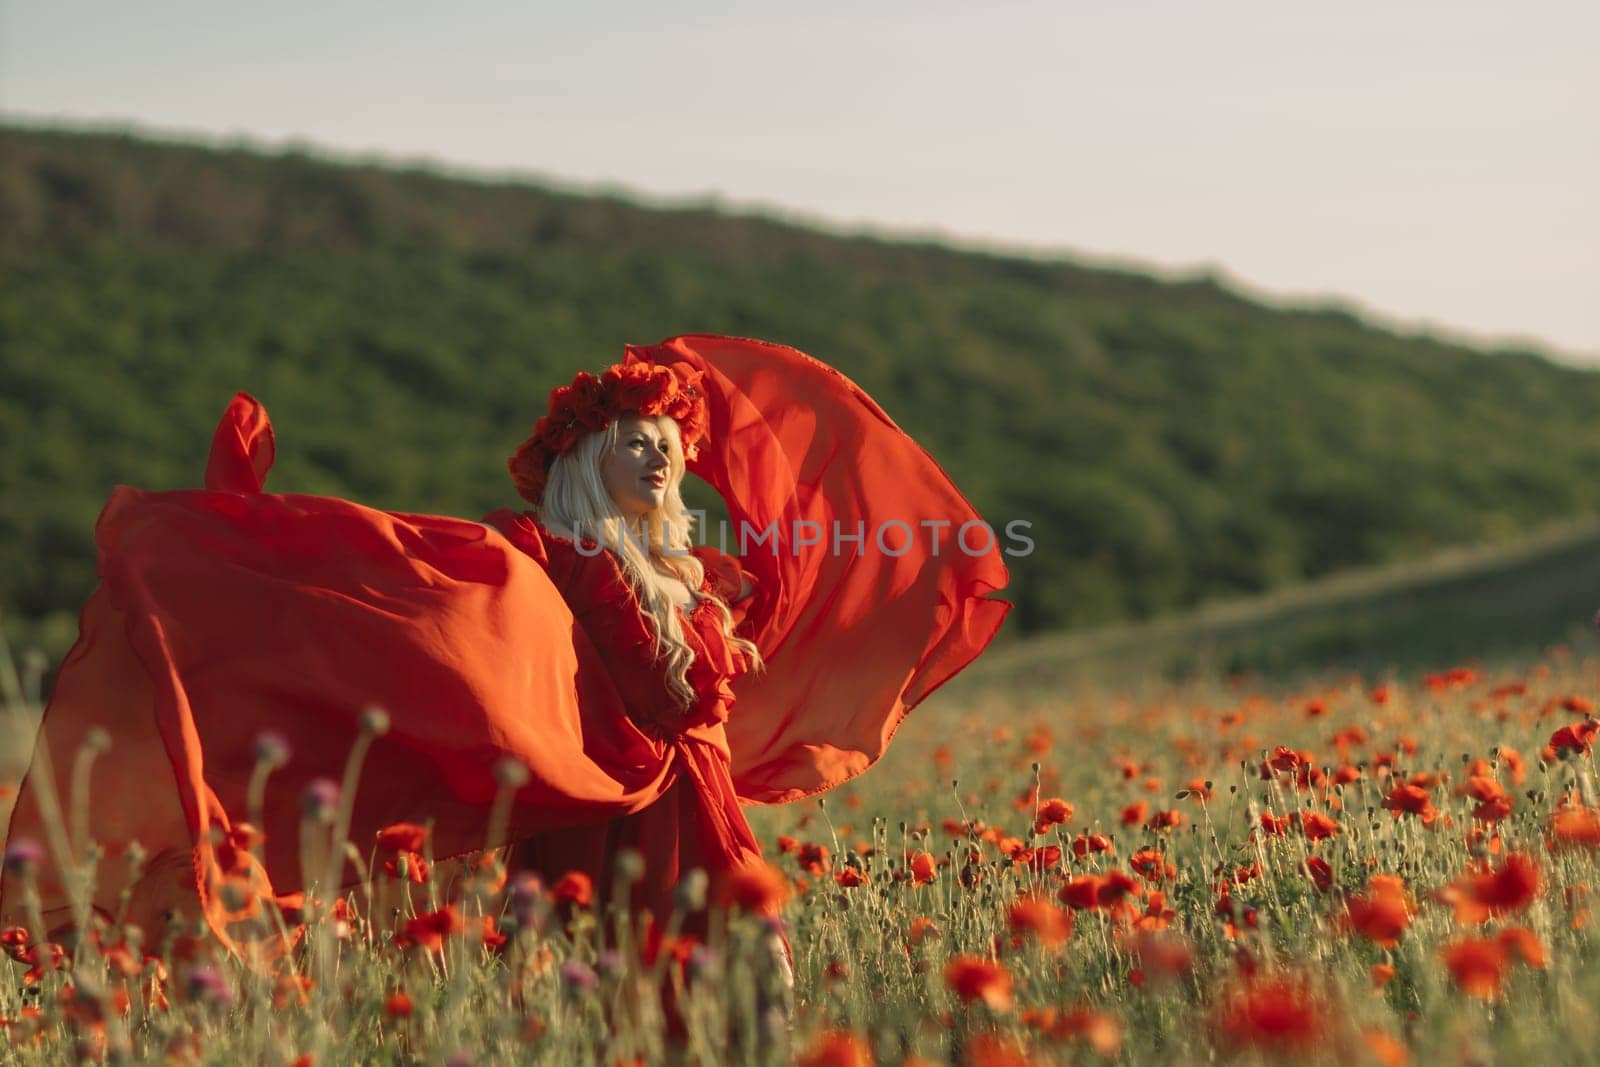 A woman in a red dress is standing in a field of red flowers. The scene is serene and peaceful, with the woman's flowing dress and the vibrant red flowers creating a sense of beauty and tranquility